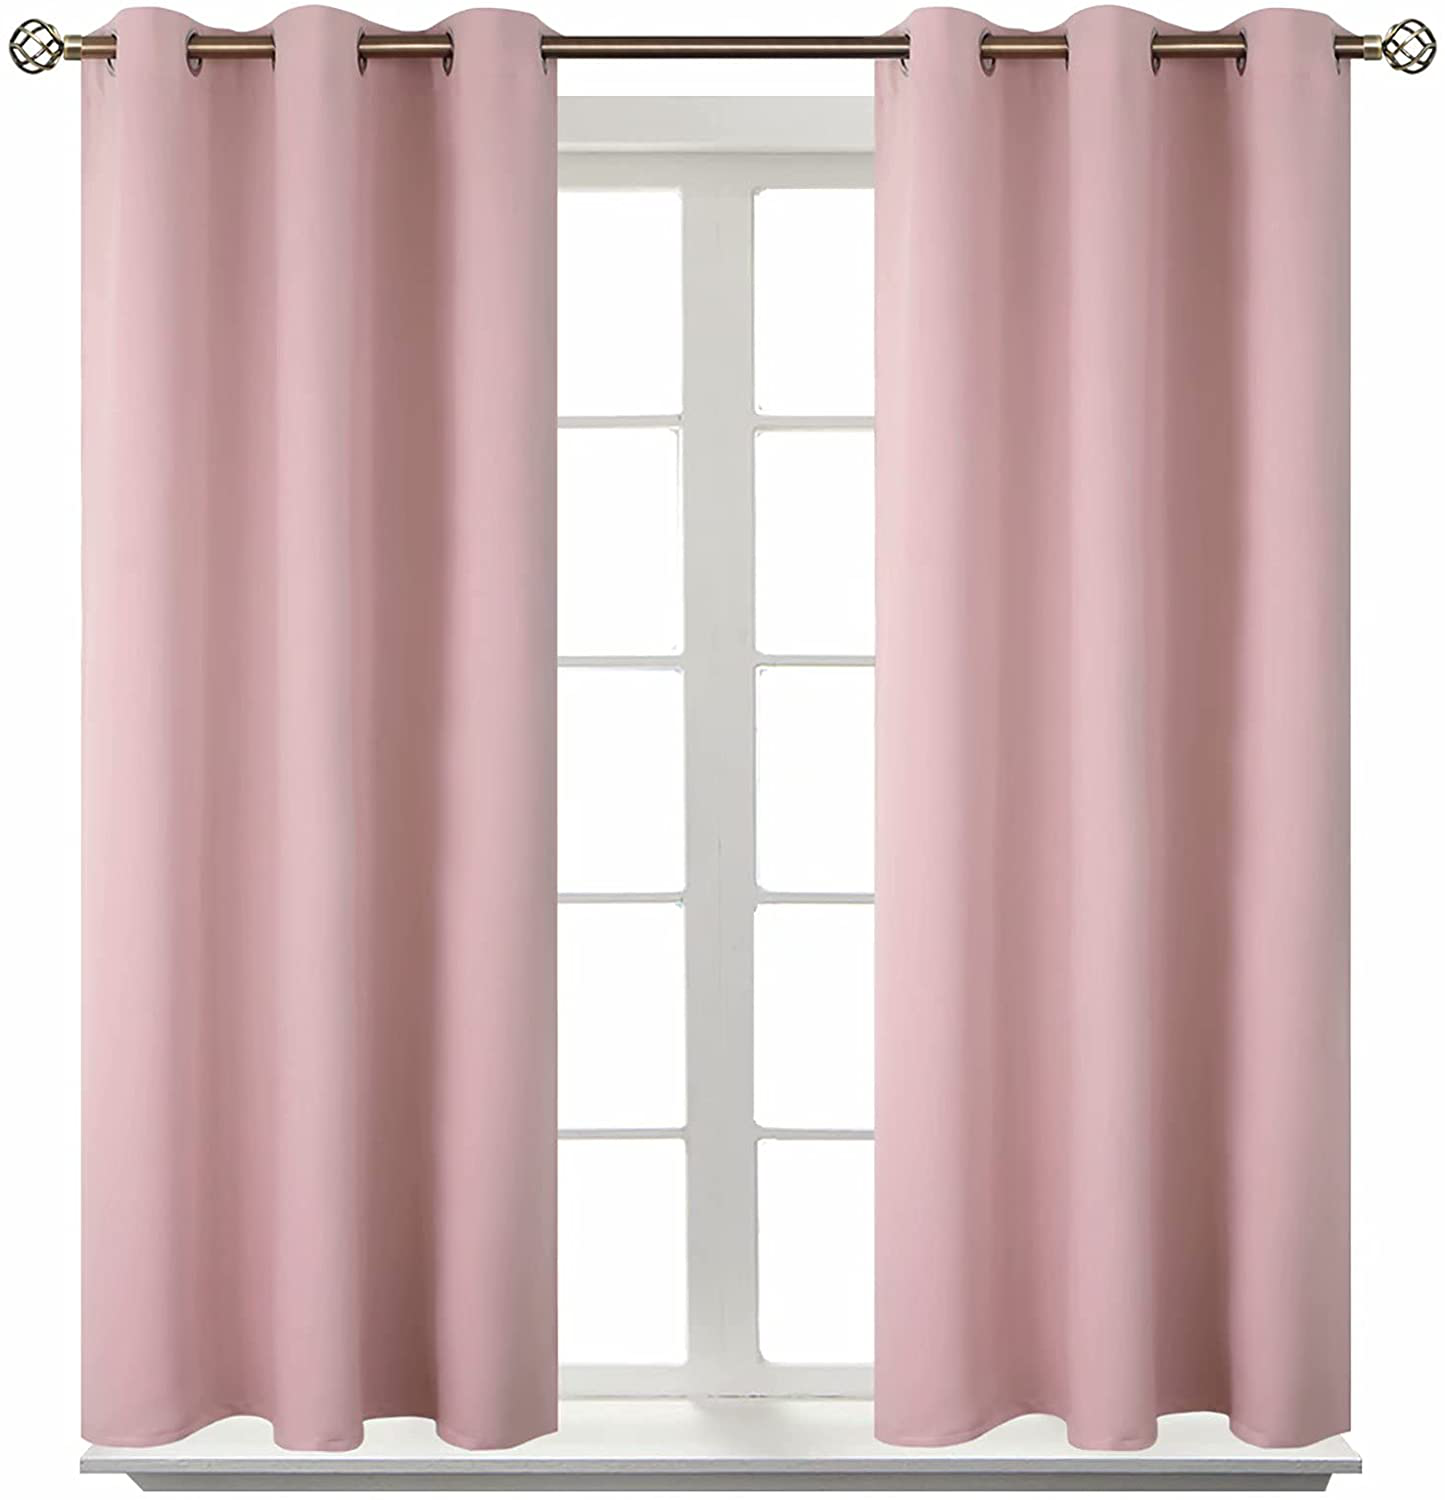 BGment Blackout Curtains - Grommet Thermal Insulated Room Darkening Bedroom and Living Room Curtain, Set of 2 Panels (38 x 45 Inch, Beige)